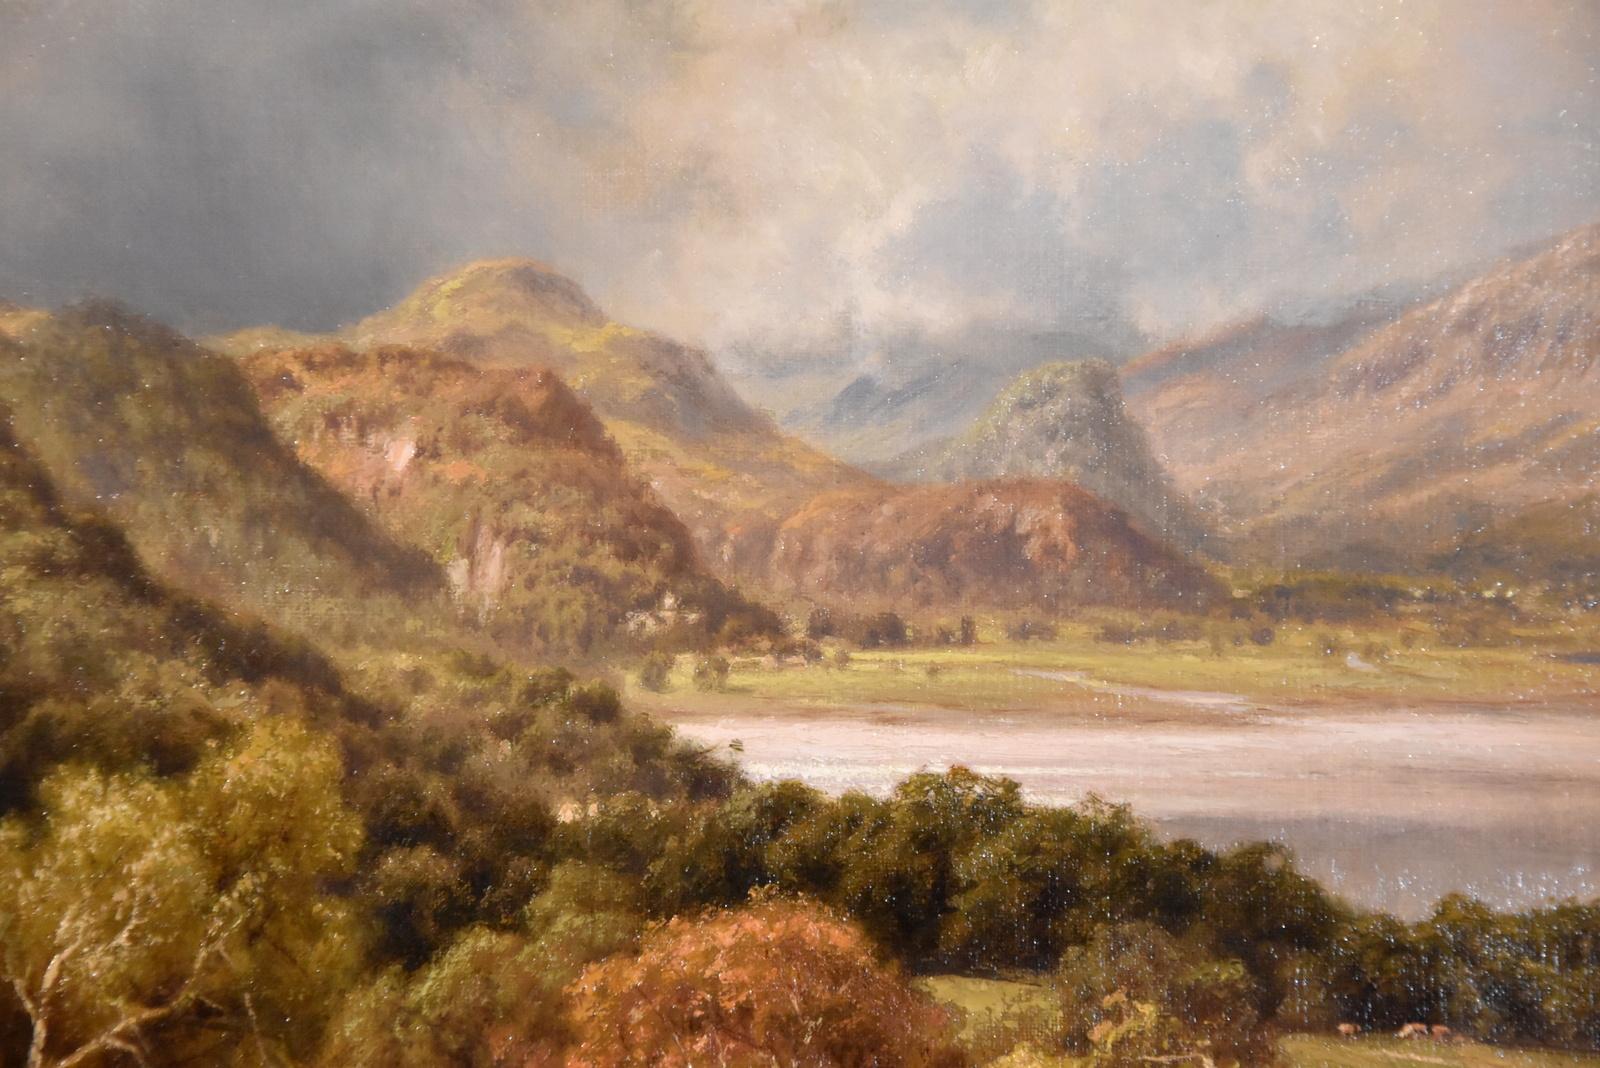 Oil Painting by Edward Henry Holder “Scene in the Lake District” 1